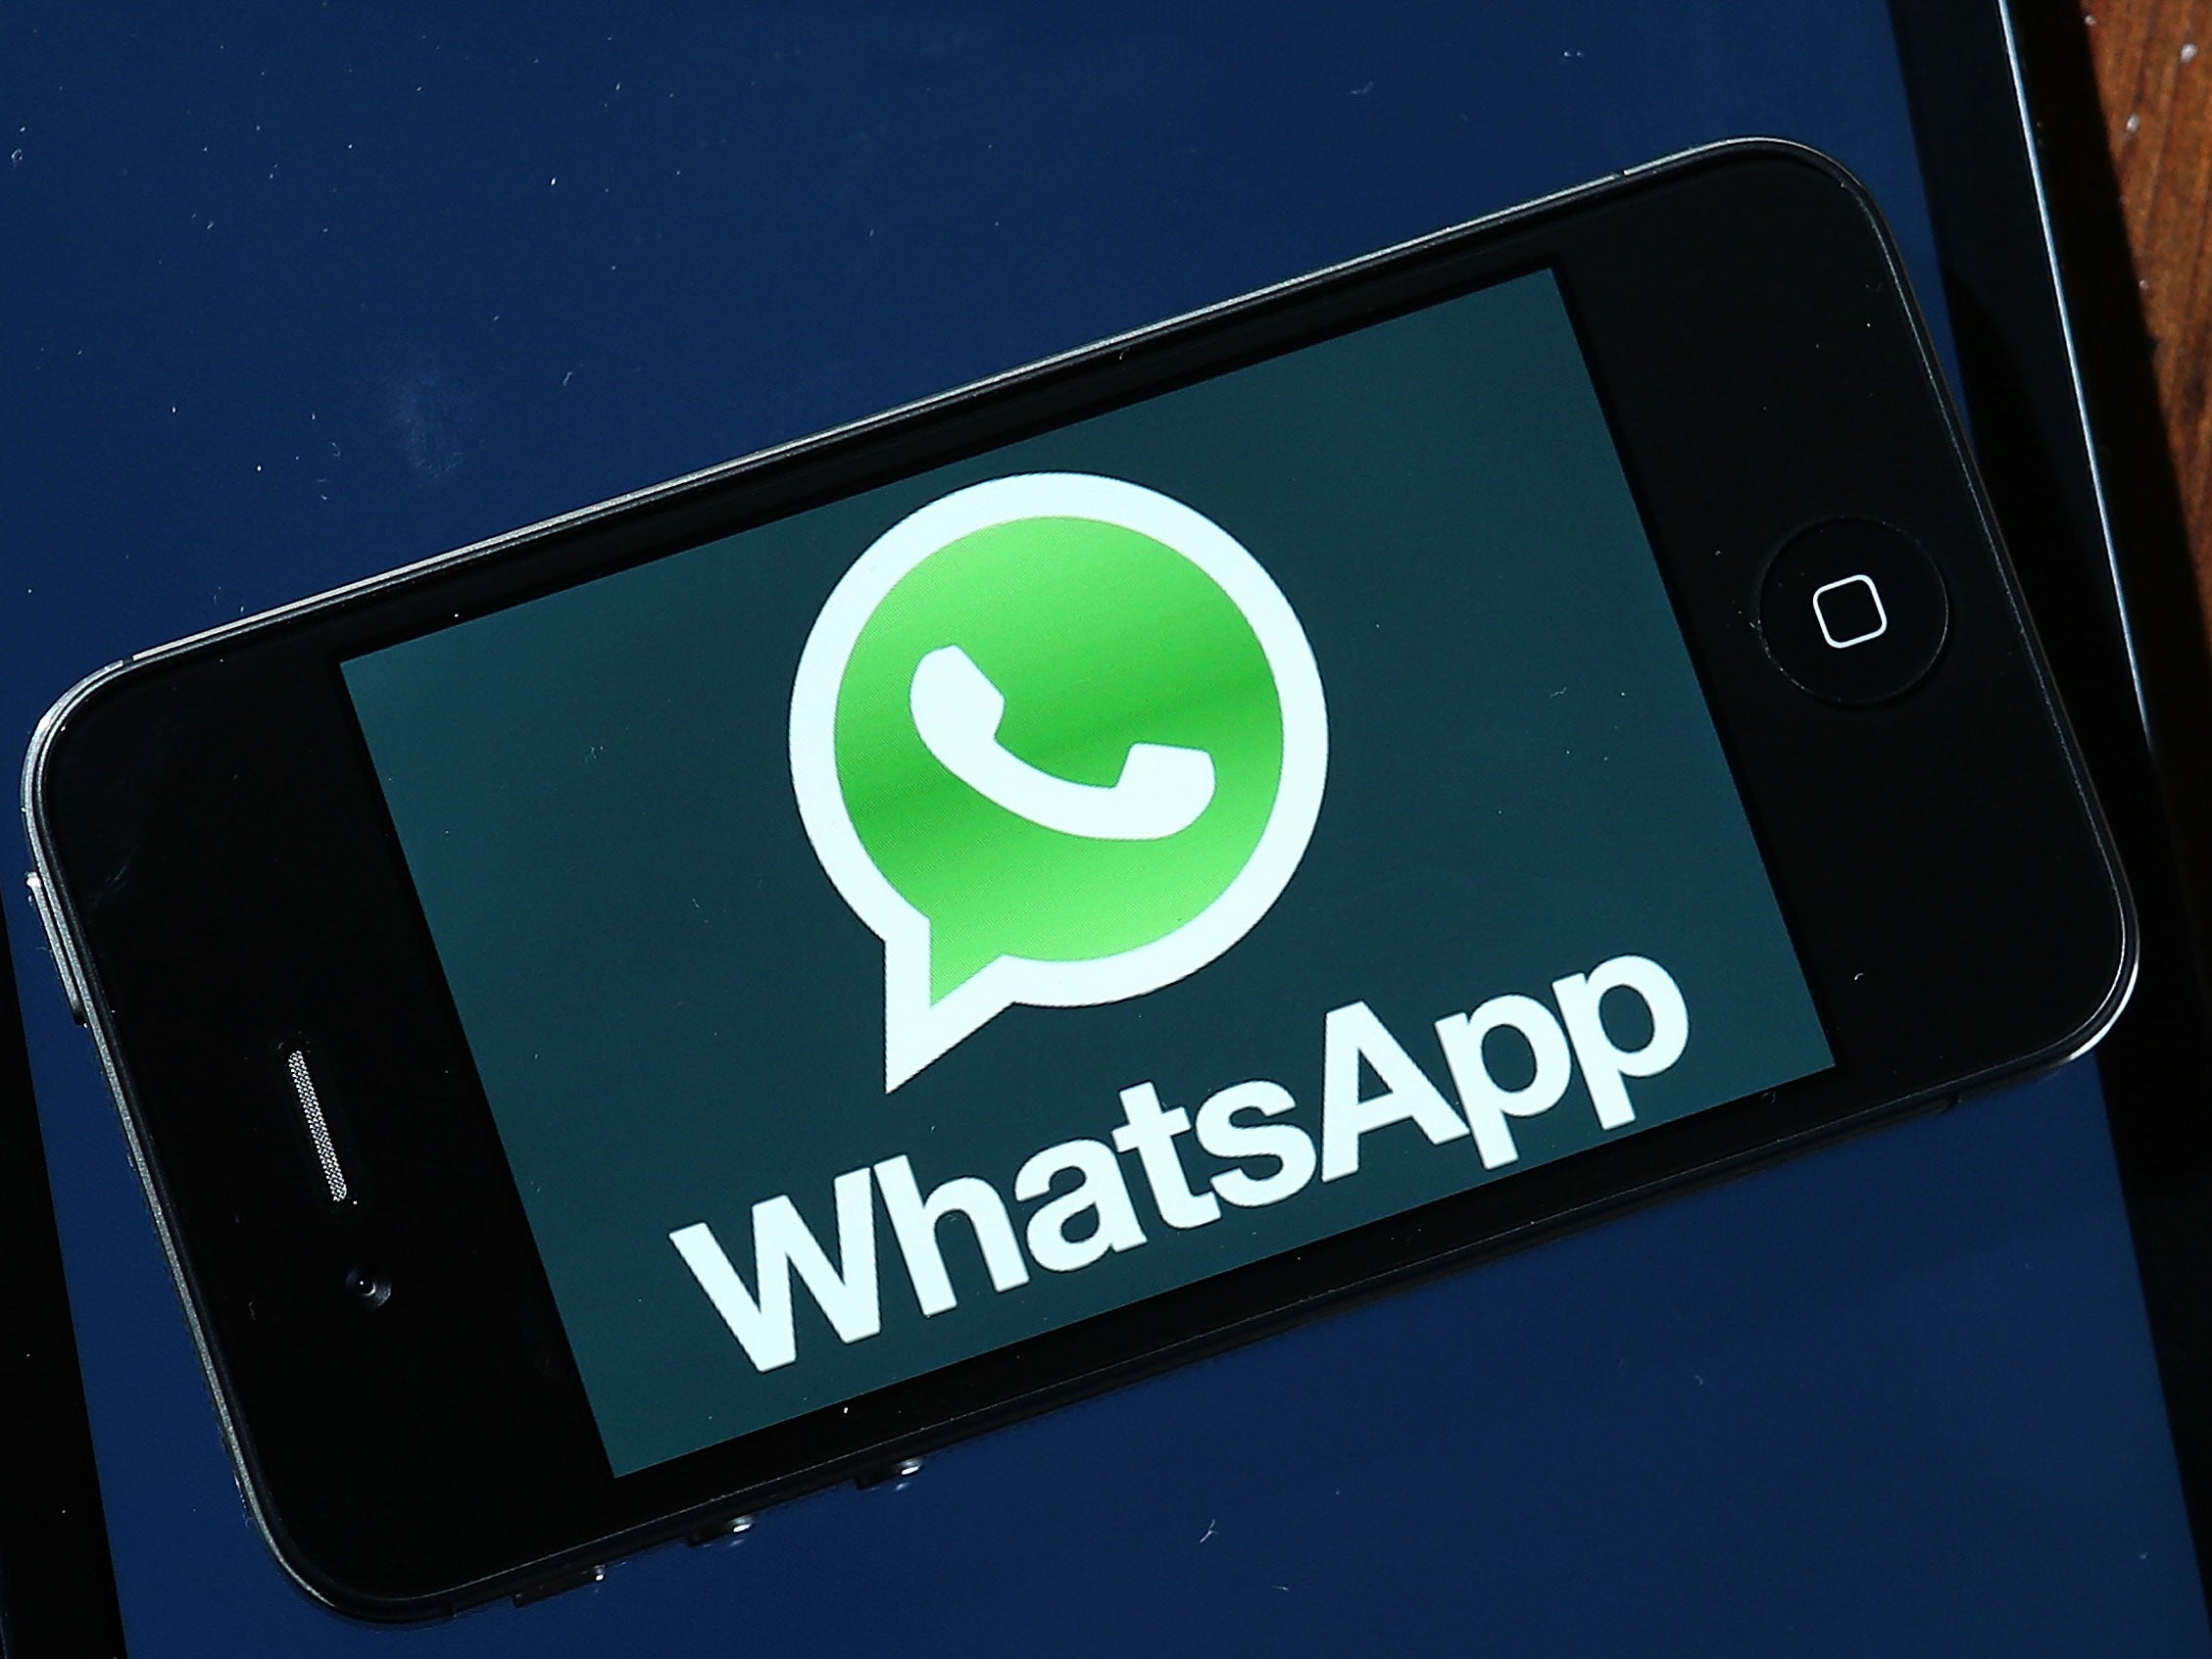  WhatsApp  update includes easier photo sharing PDF support 